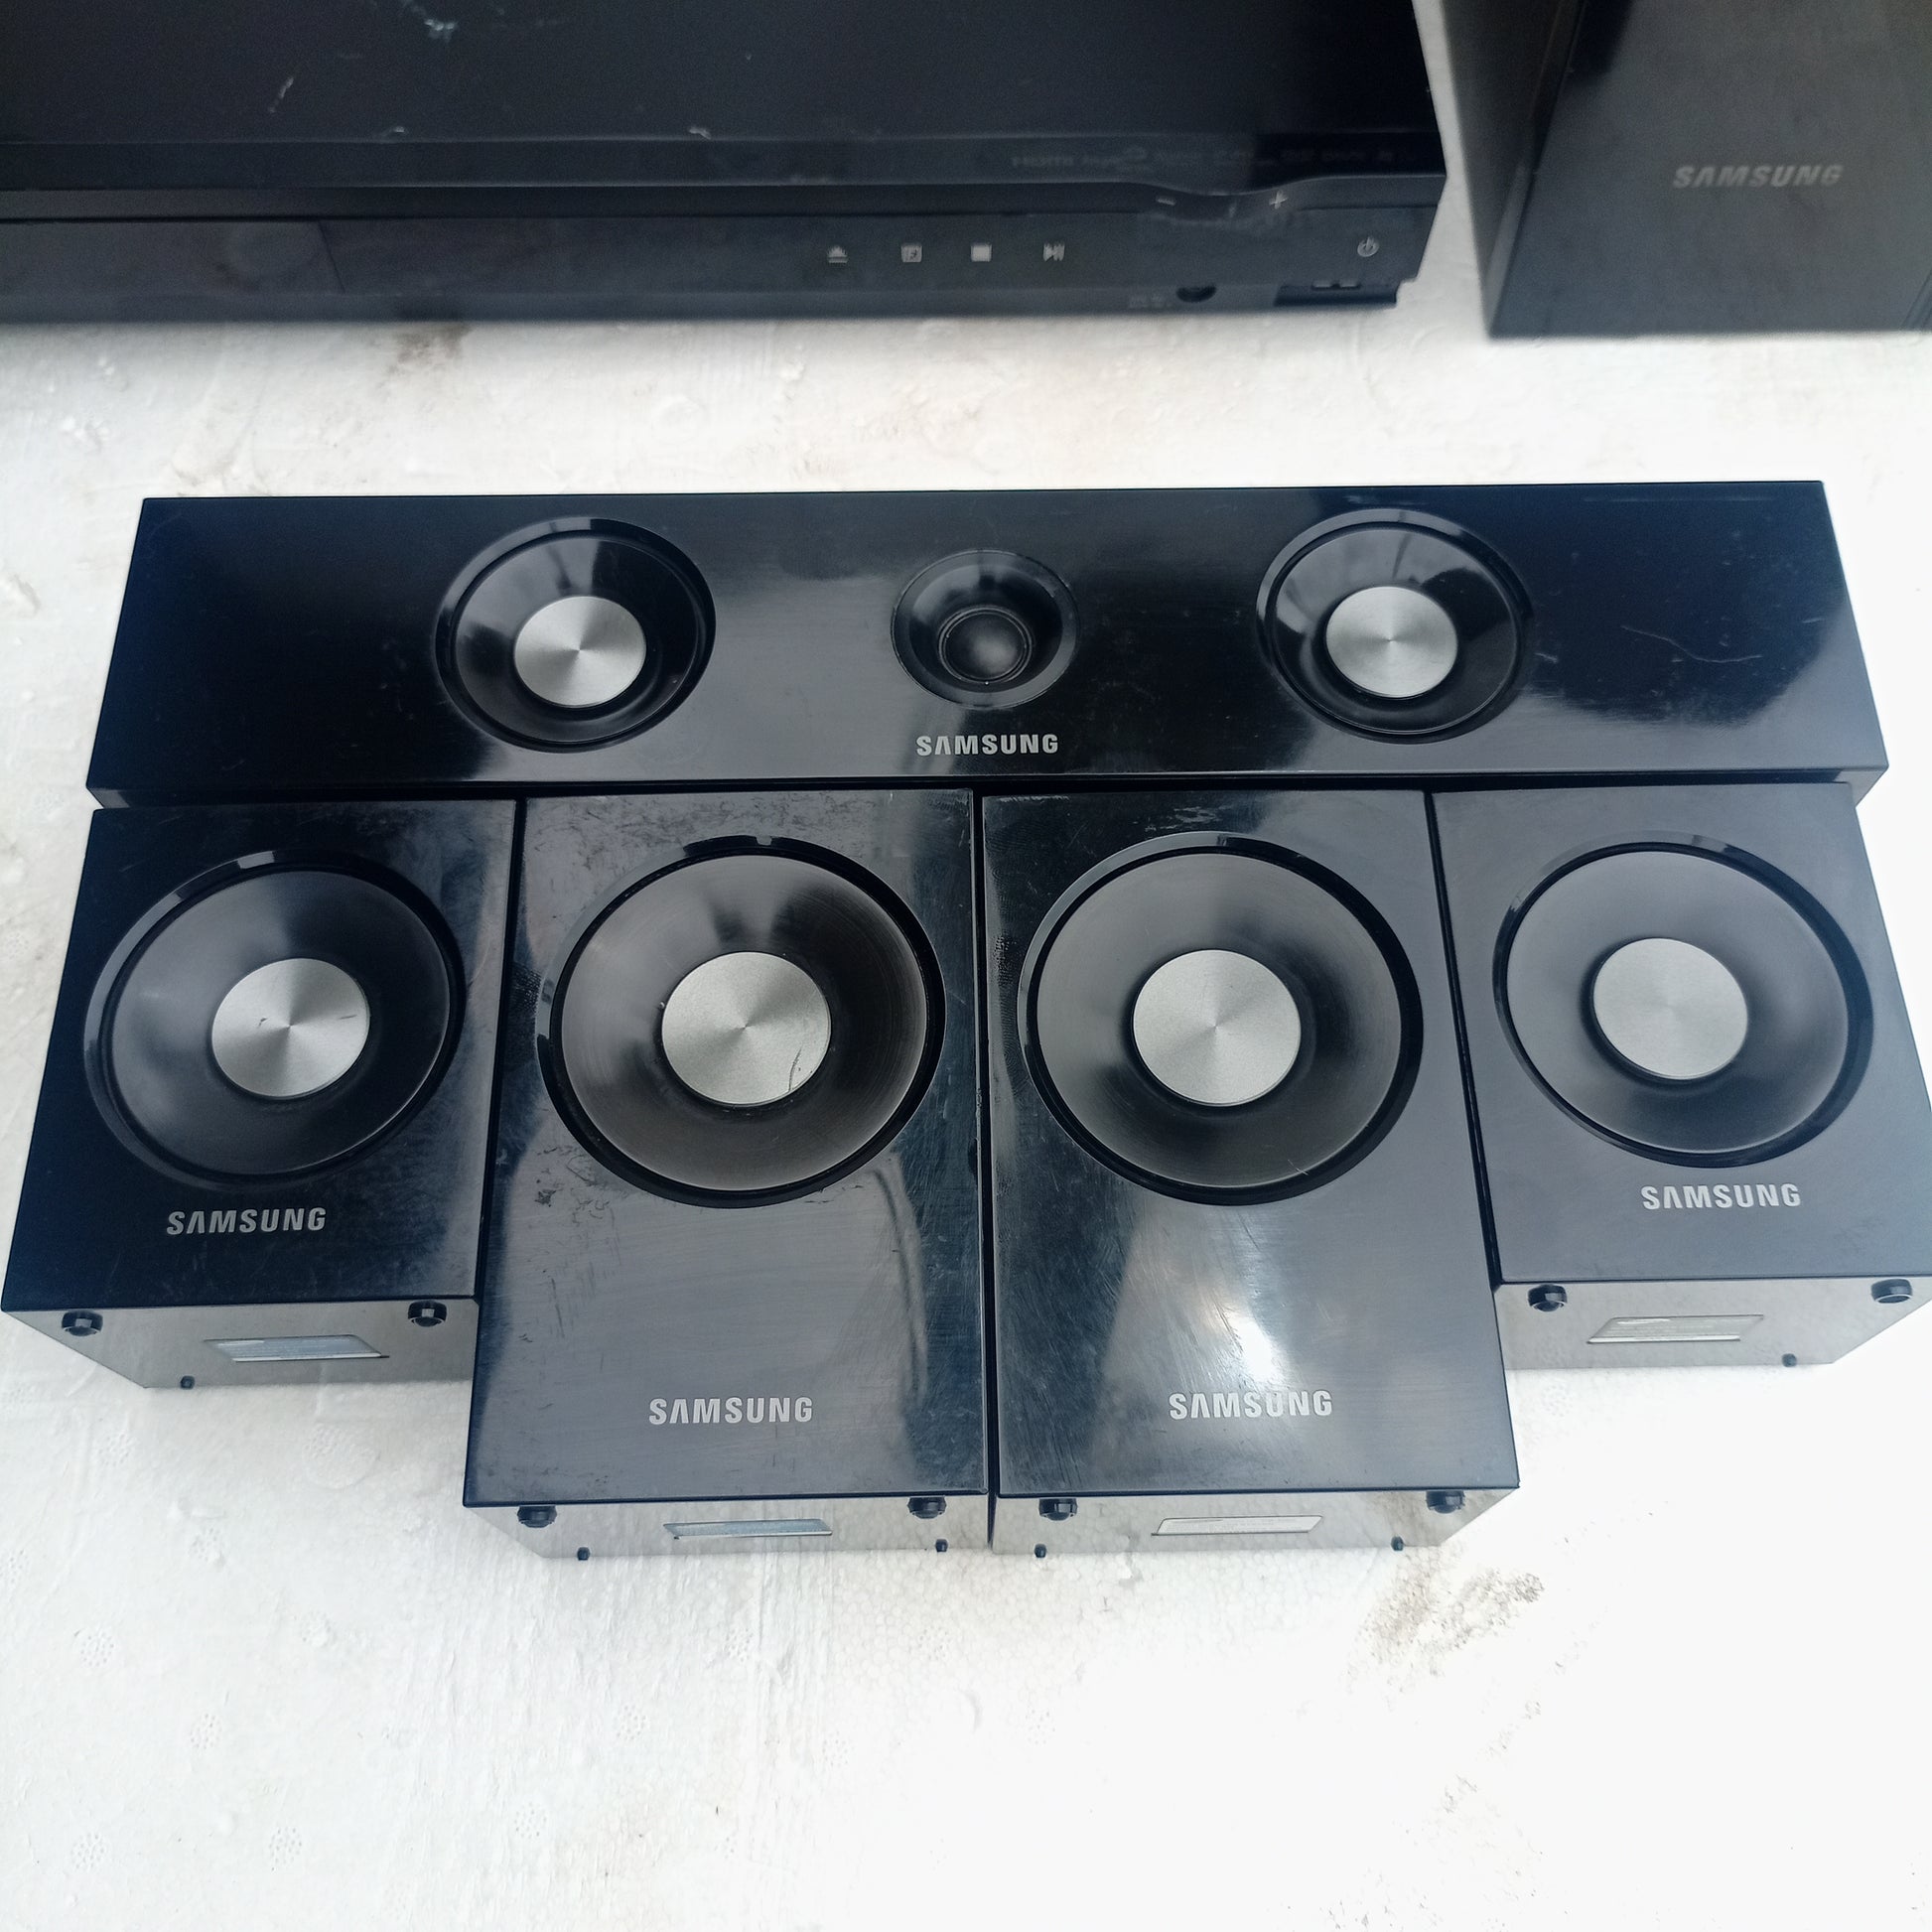 Samsung HT-D450 850Watts DVD Home Theater Complete Set - Speakers